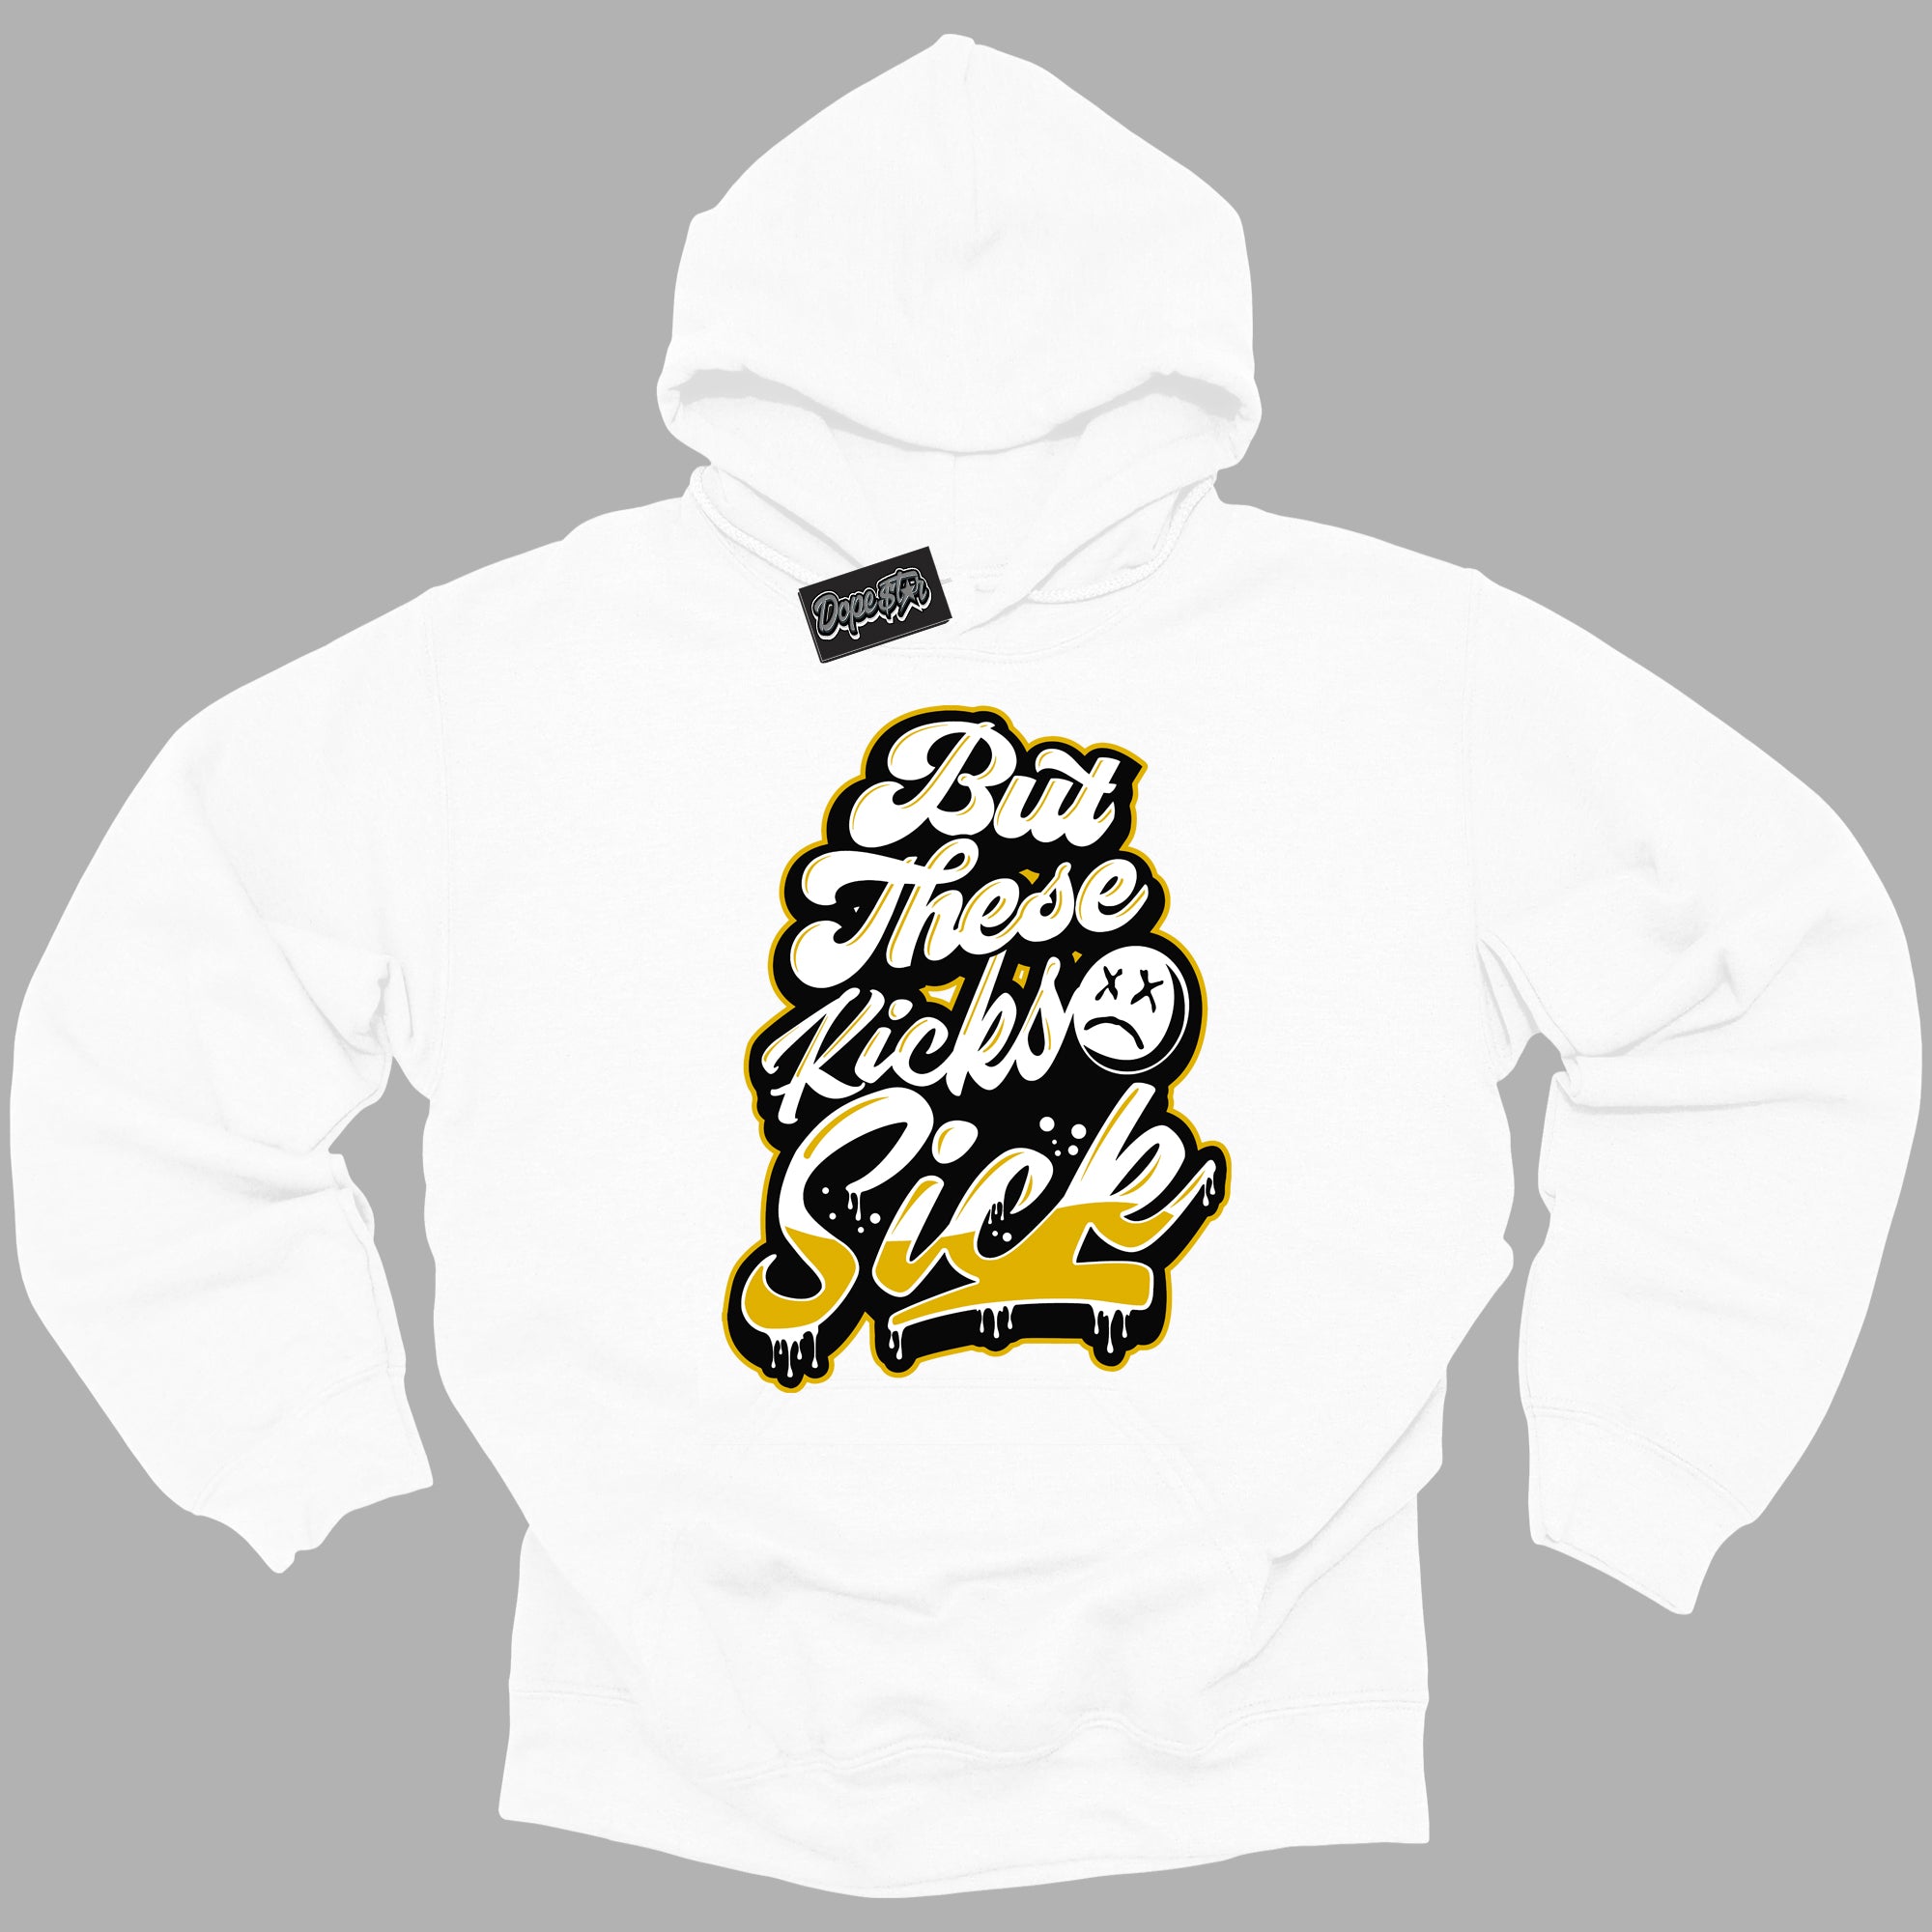 Cool White Hoodie with “ Kick Sick ”  design that Perfectly Matches Yellow Ochre 6s Sneakers.